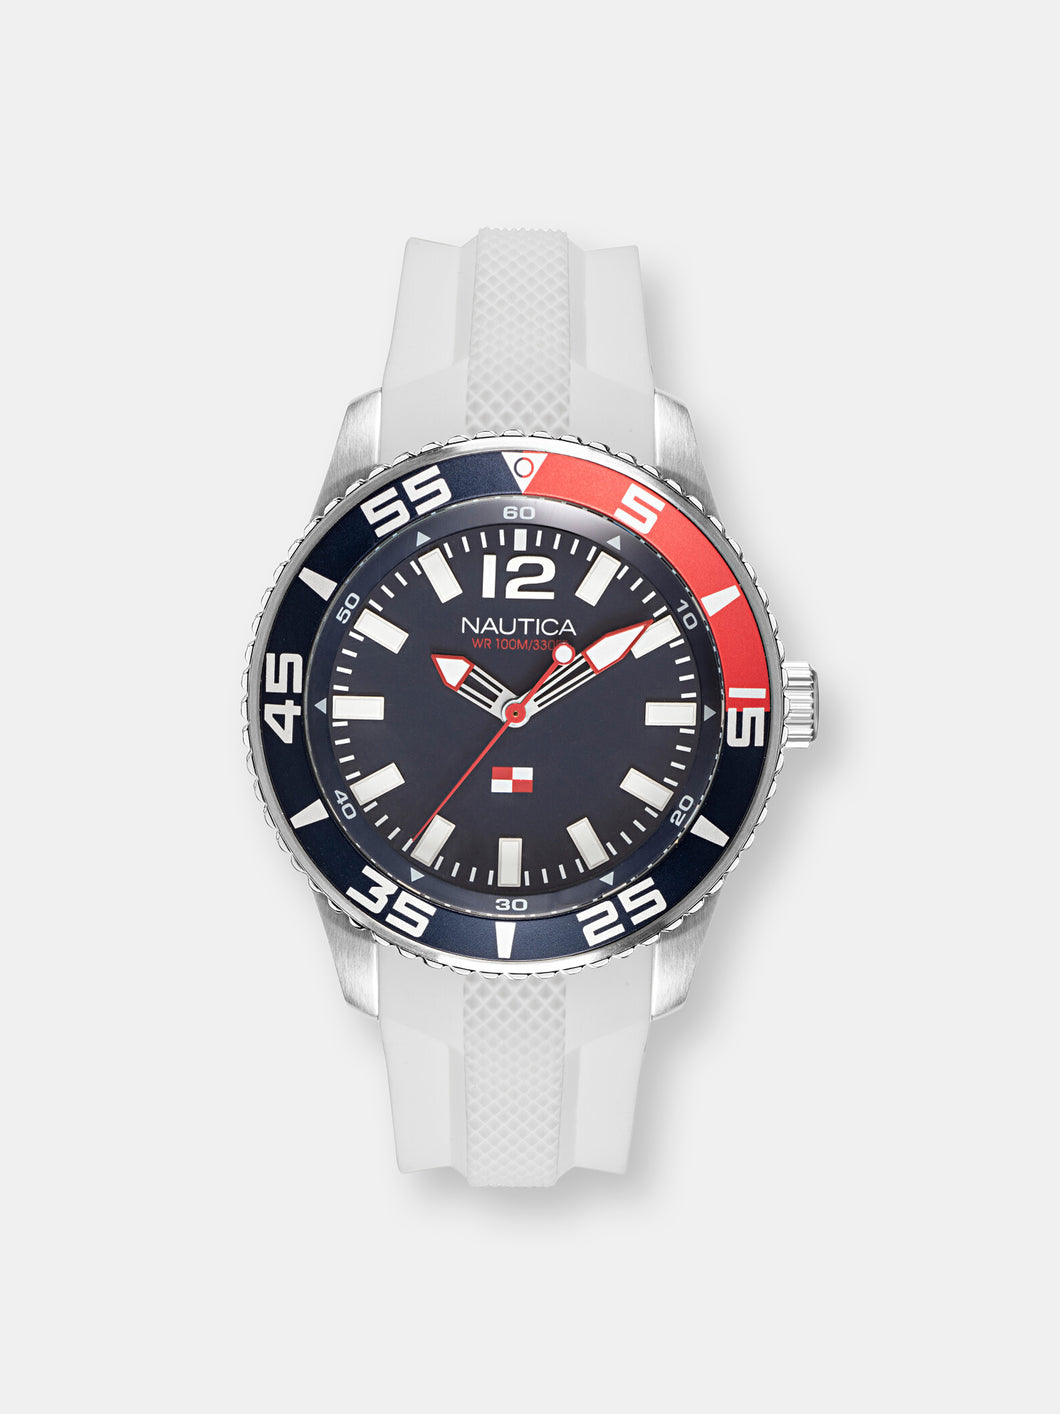 Nautica Watch NAPPBP905 Pacific Beach, Analog, Water Resistant, Luminous Hands, Silicone Band, Buckle Clasp, Blue